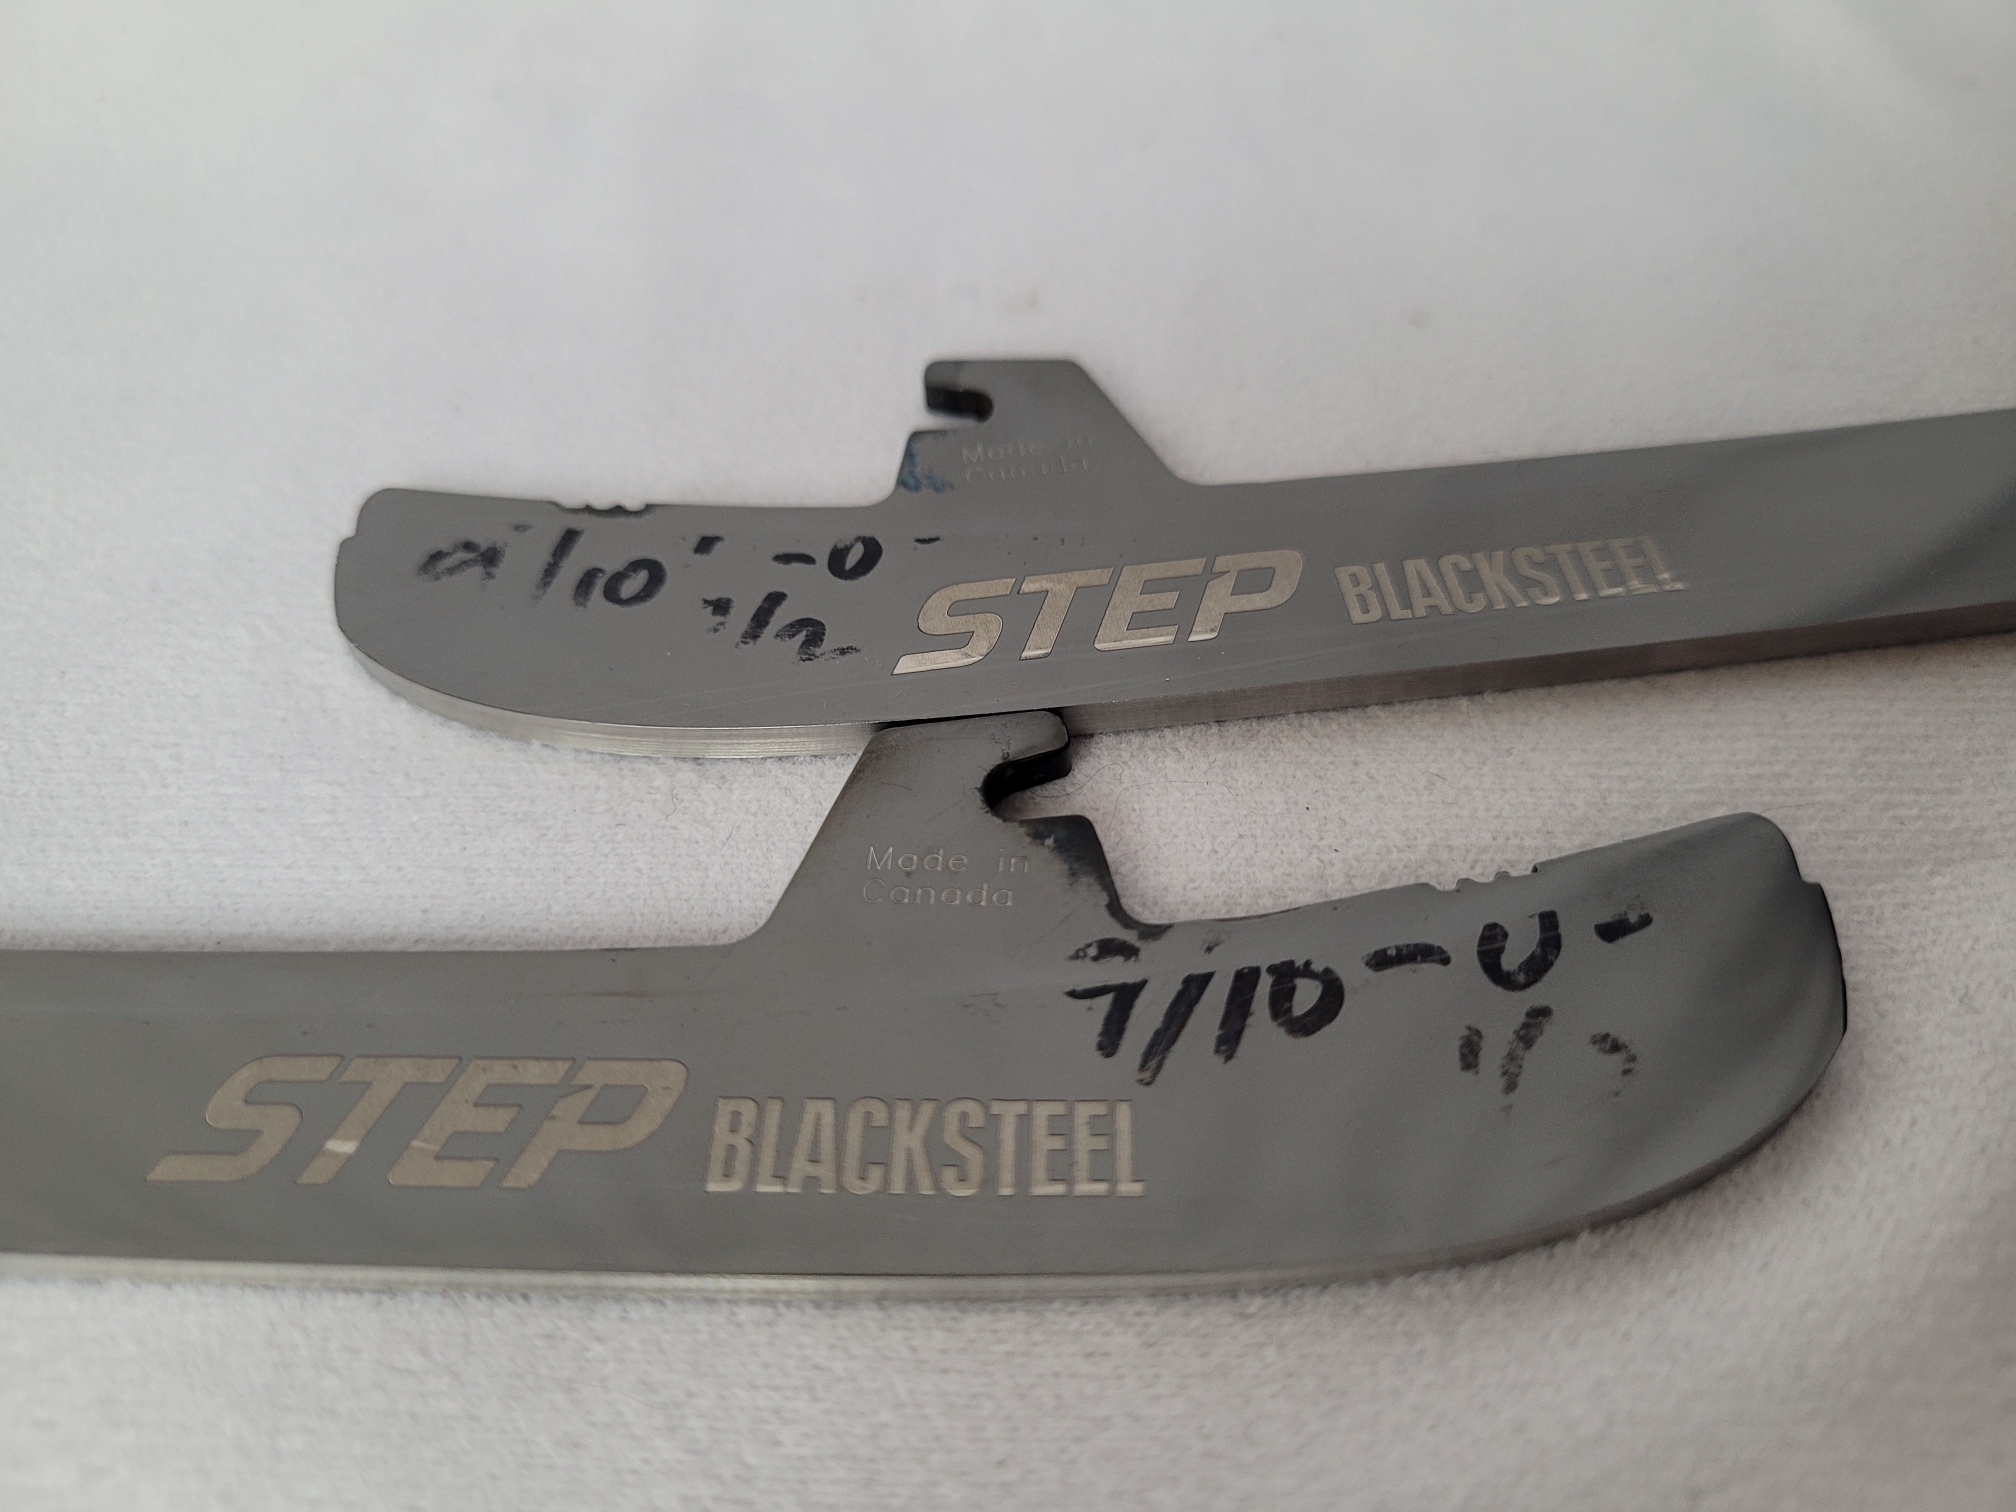 STEP BlackSteel 247mm Combi 9/10 profile (9' - 10') for CCM XS holders